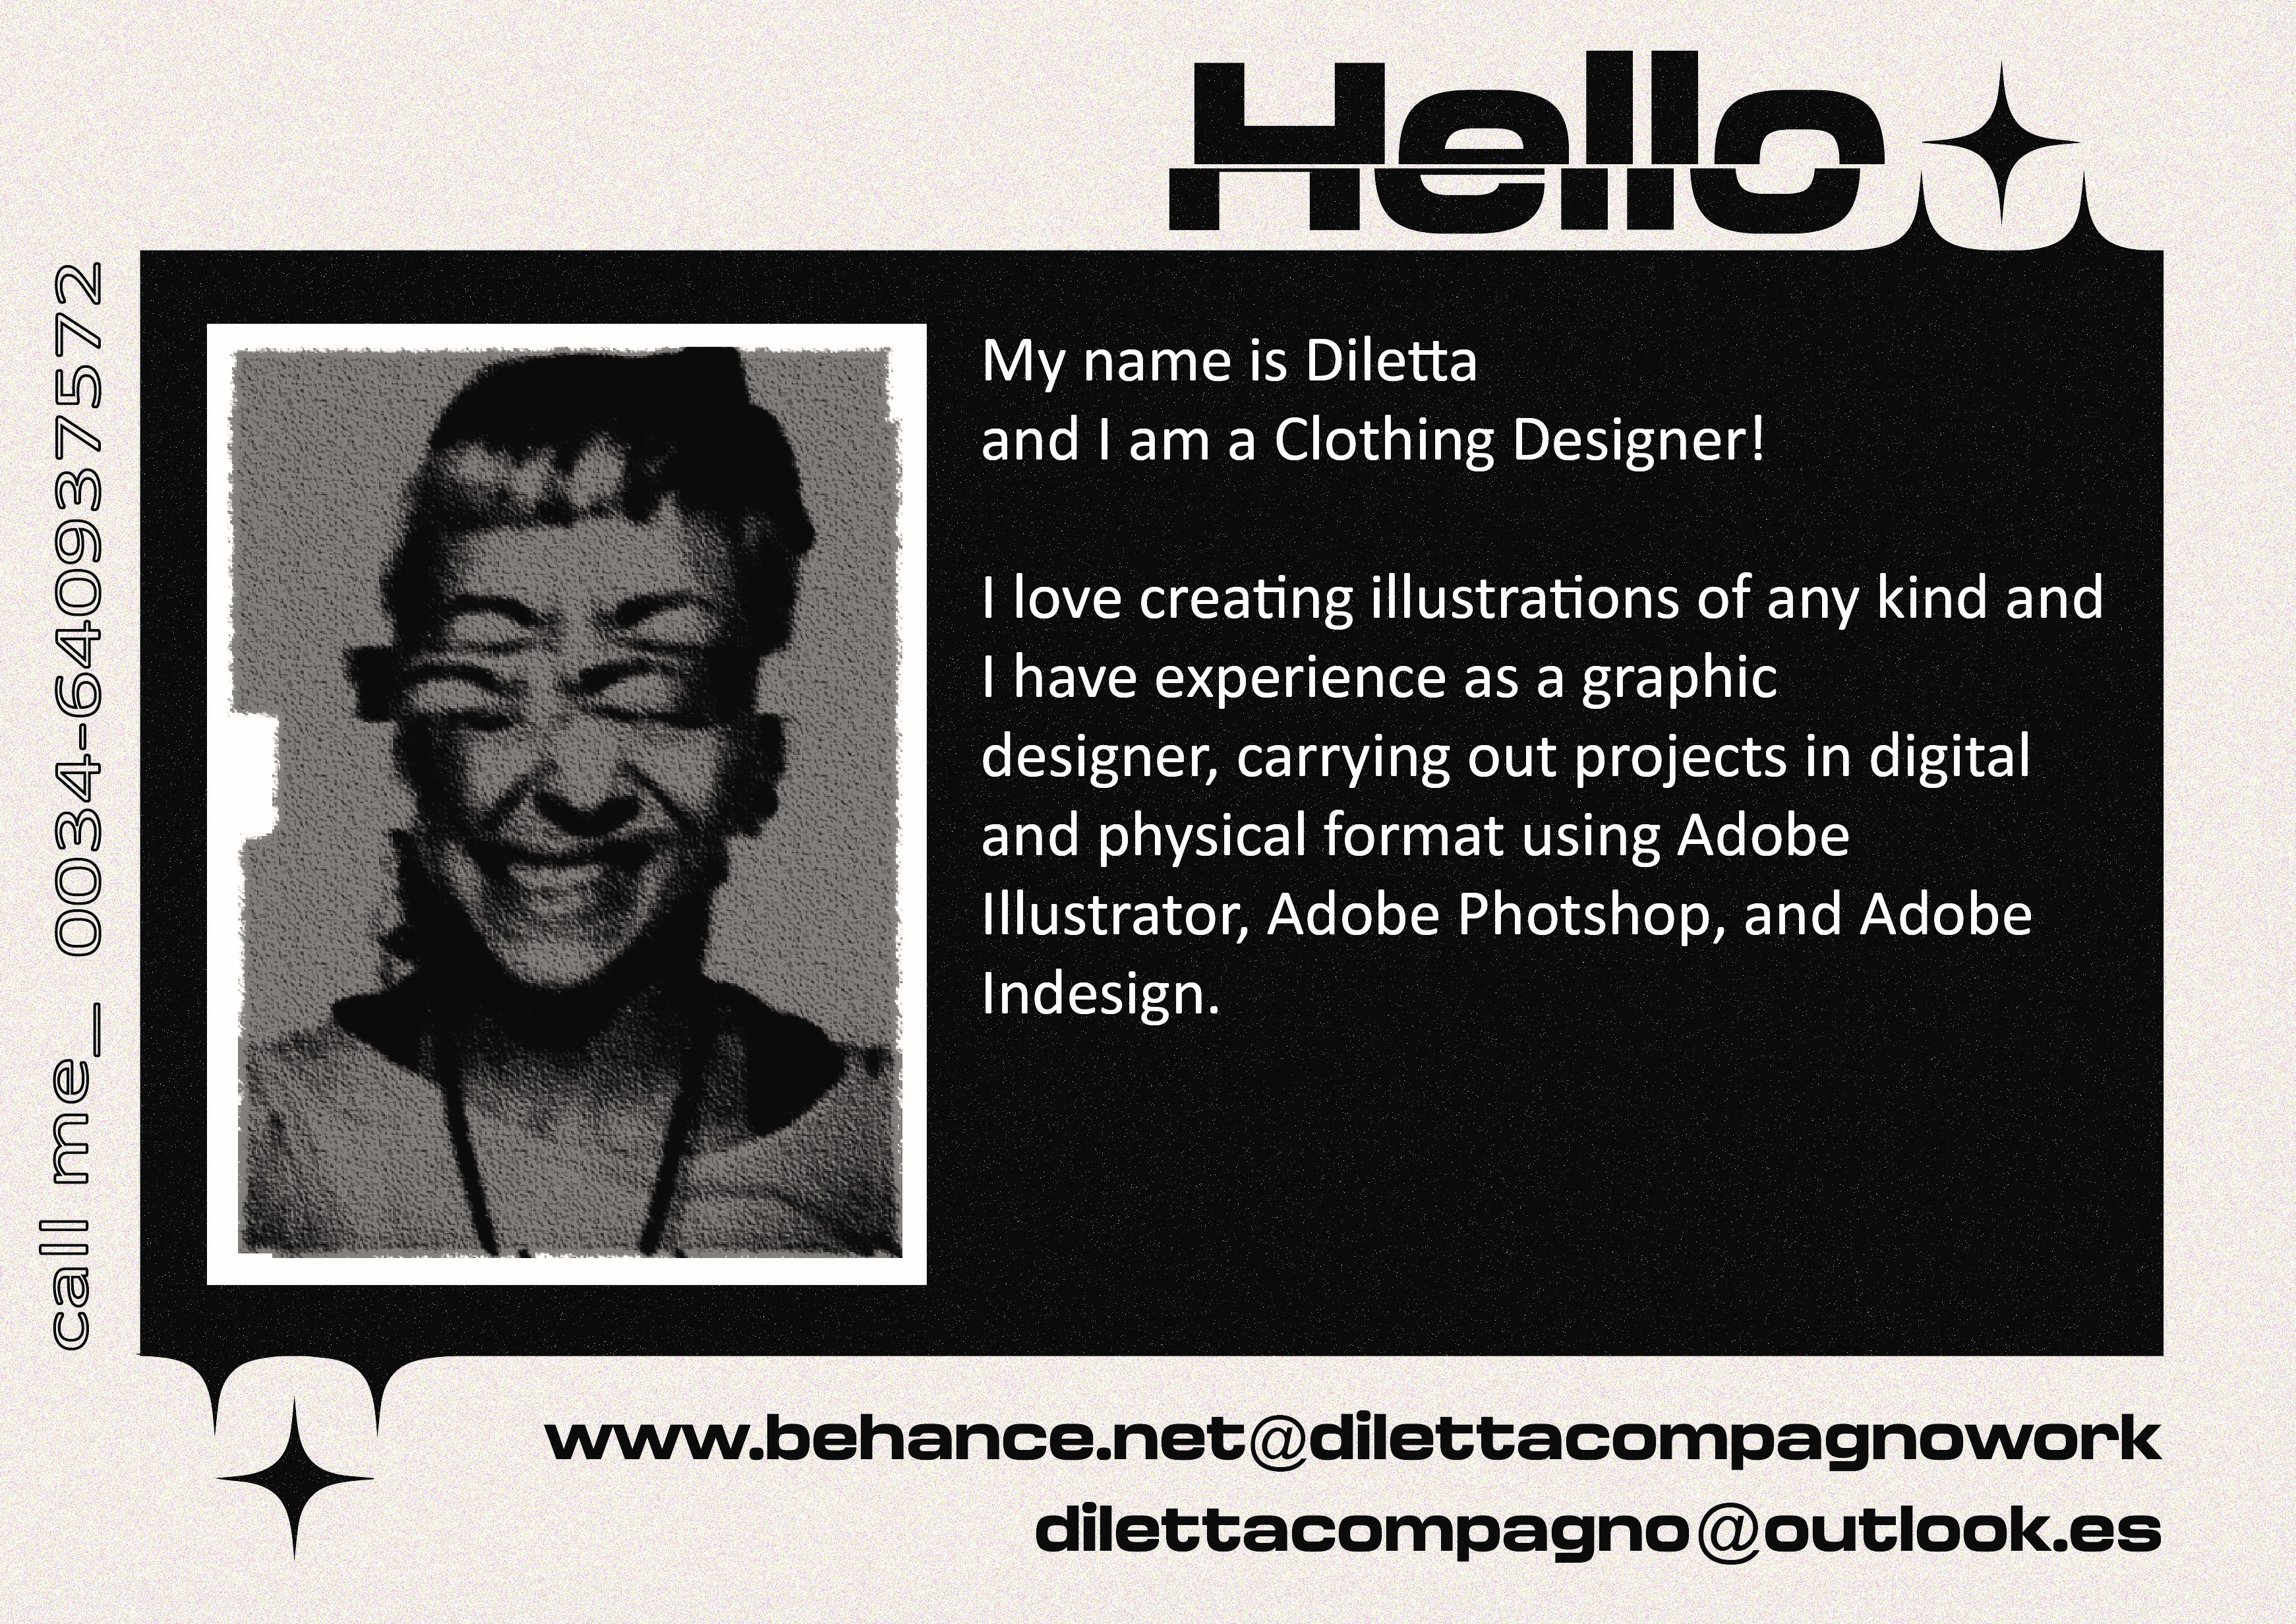 My name is Diletta
and | am a Clothing Designer!

| love creating illustrations of any kind and
| have experience as a graphic

designer, carrying out projects in digital
and physical format using Adobe
Illustrator, Adobe Photshop, and Adobe
Indesign.

N
N
1
N
0
a
0
ST
5
ST
mM
0
©
®
&
®
©

www.behance.net@dilettacompagnowork
dilettacompagno@outlook.es